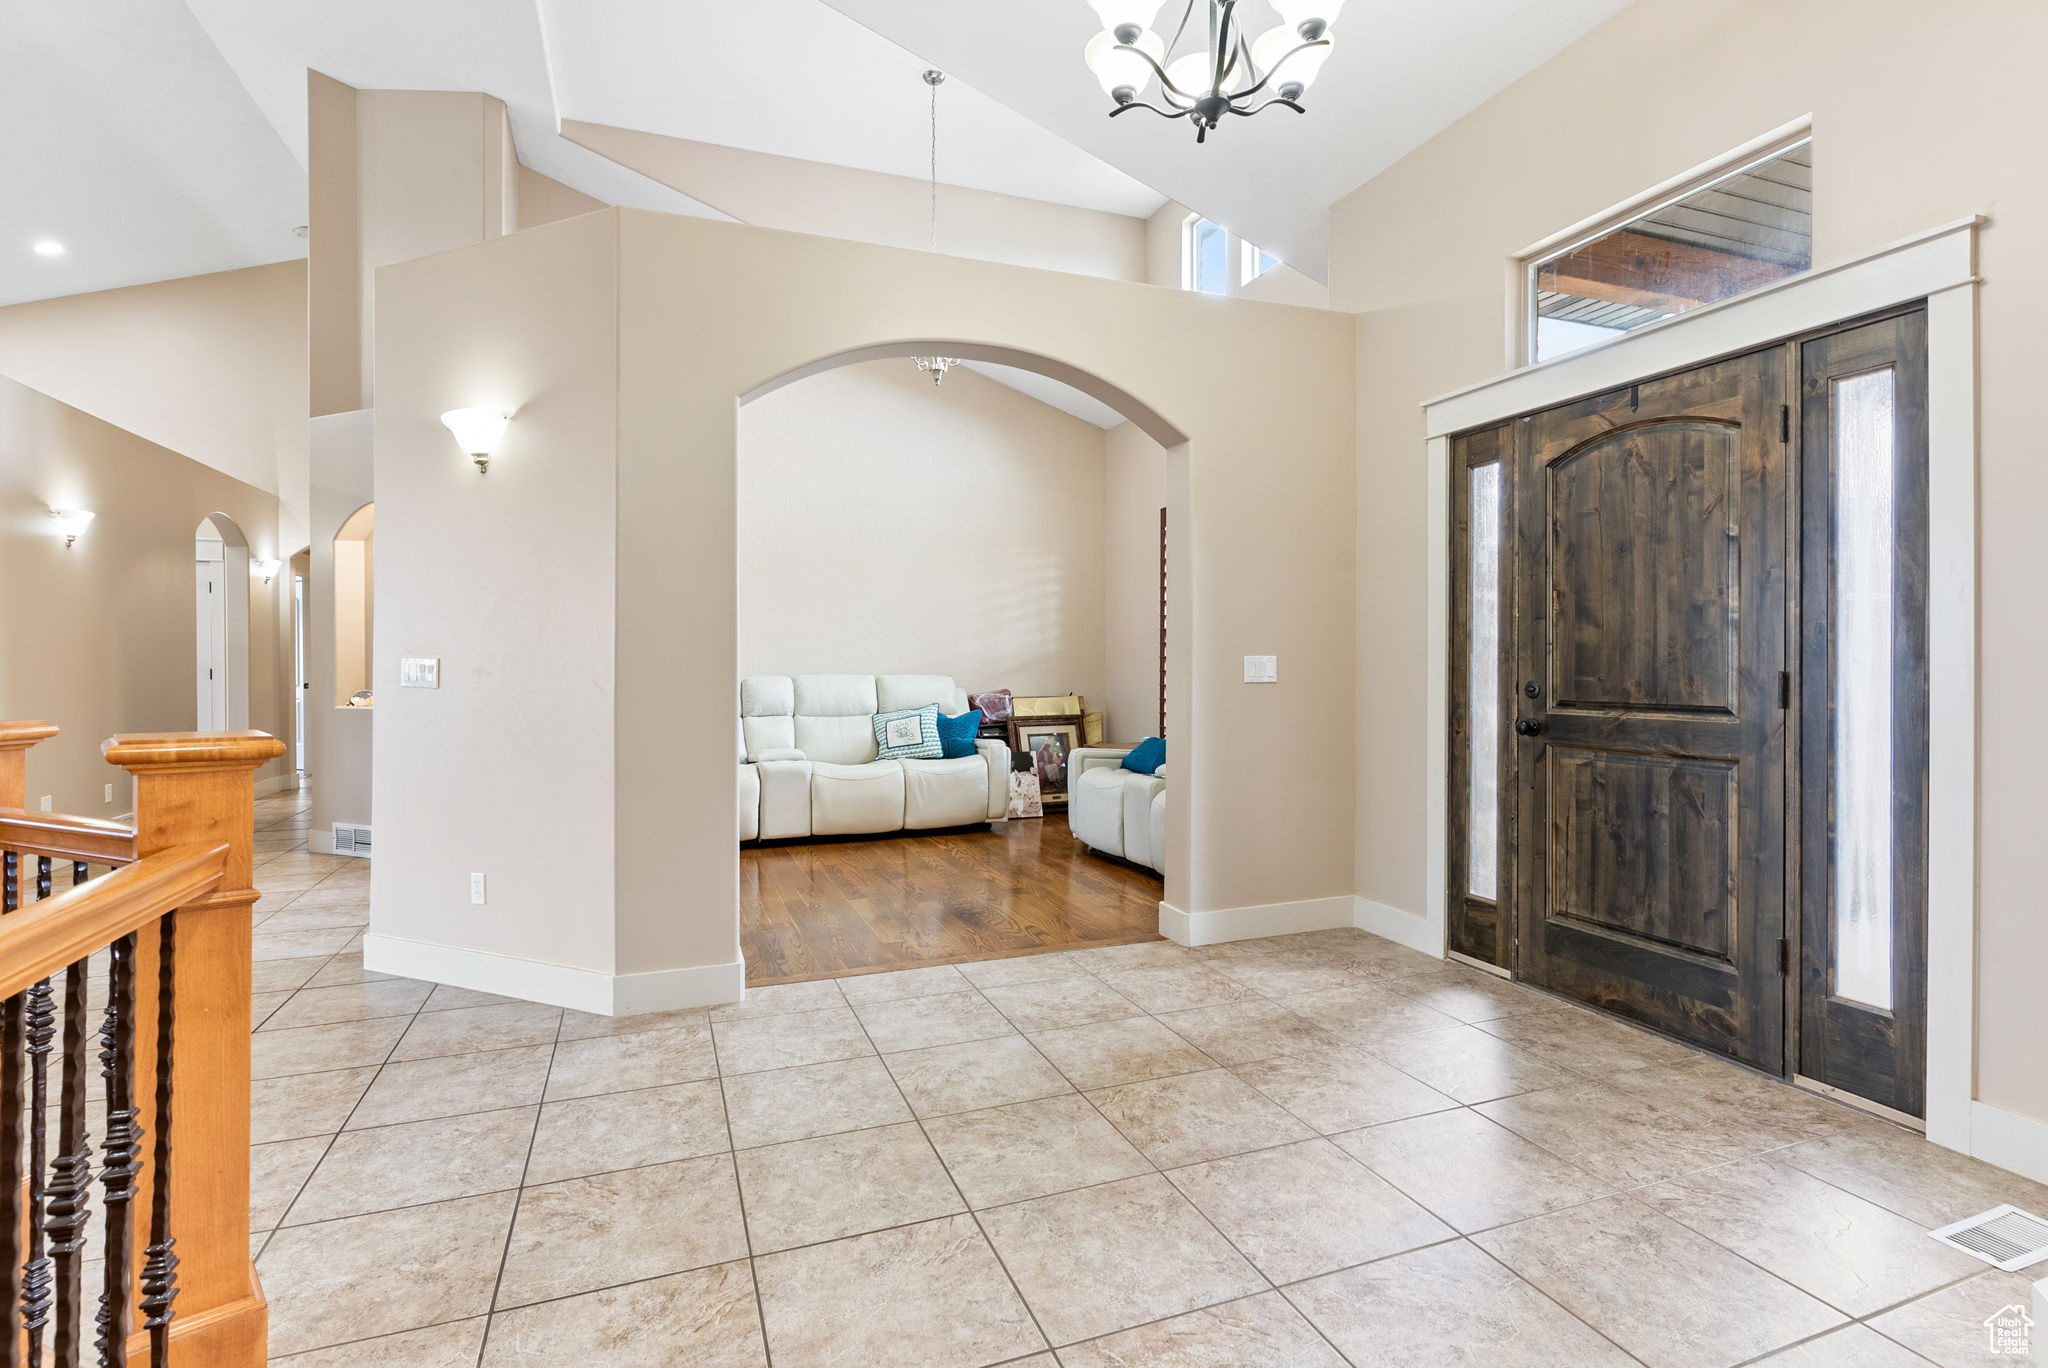 Foyer entrance featuring a notable chandelier, high vaulted ceiling, and light tile floors